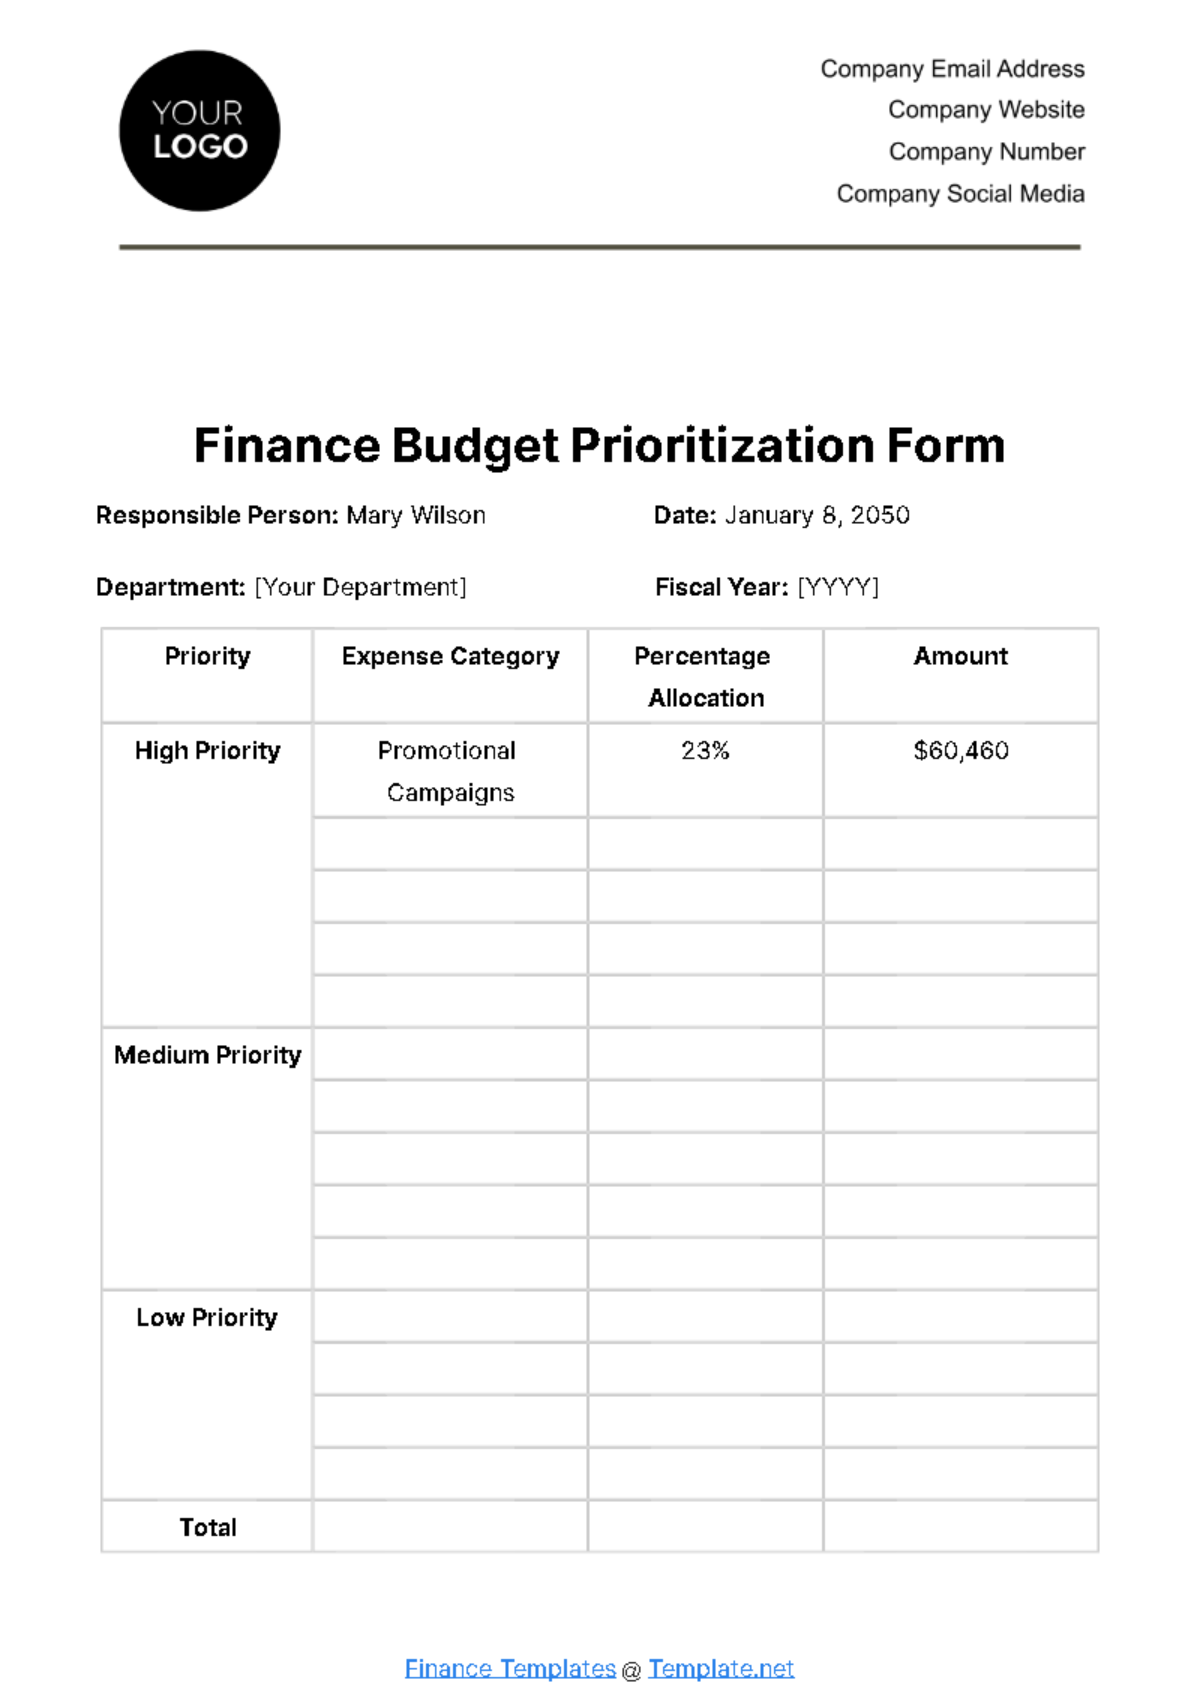 Finance Budget Prioritization Form Template